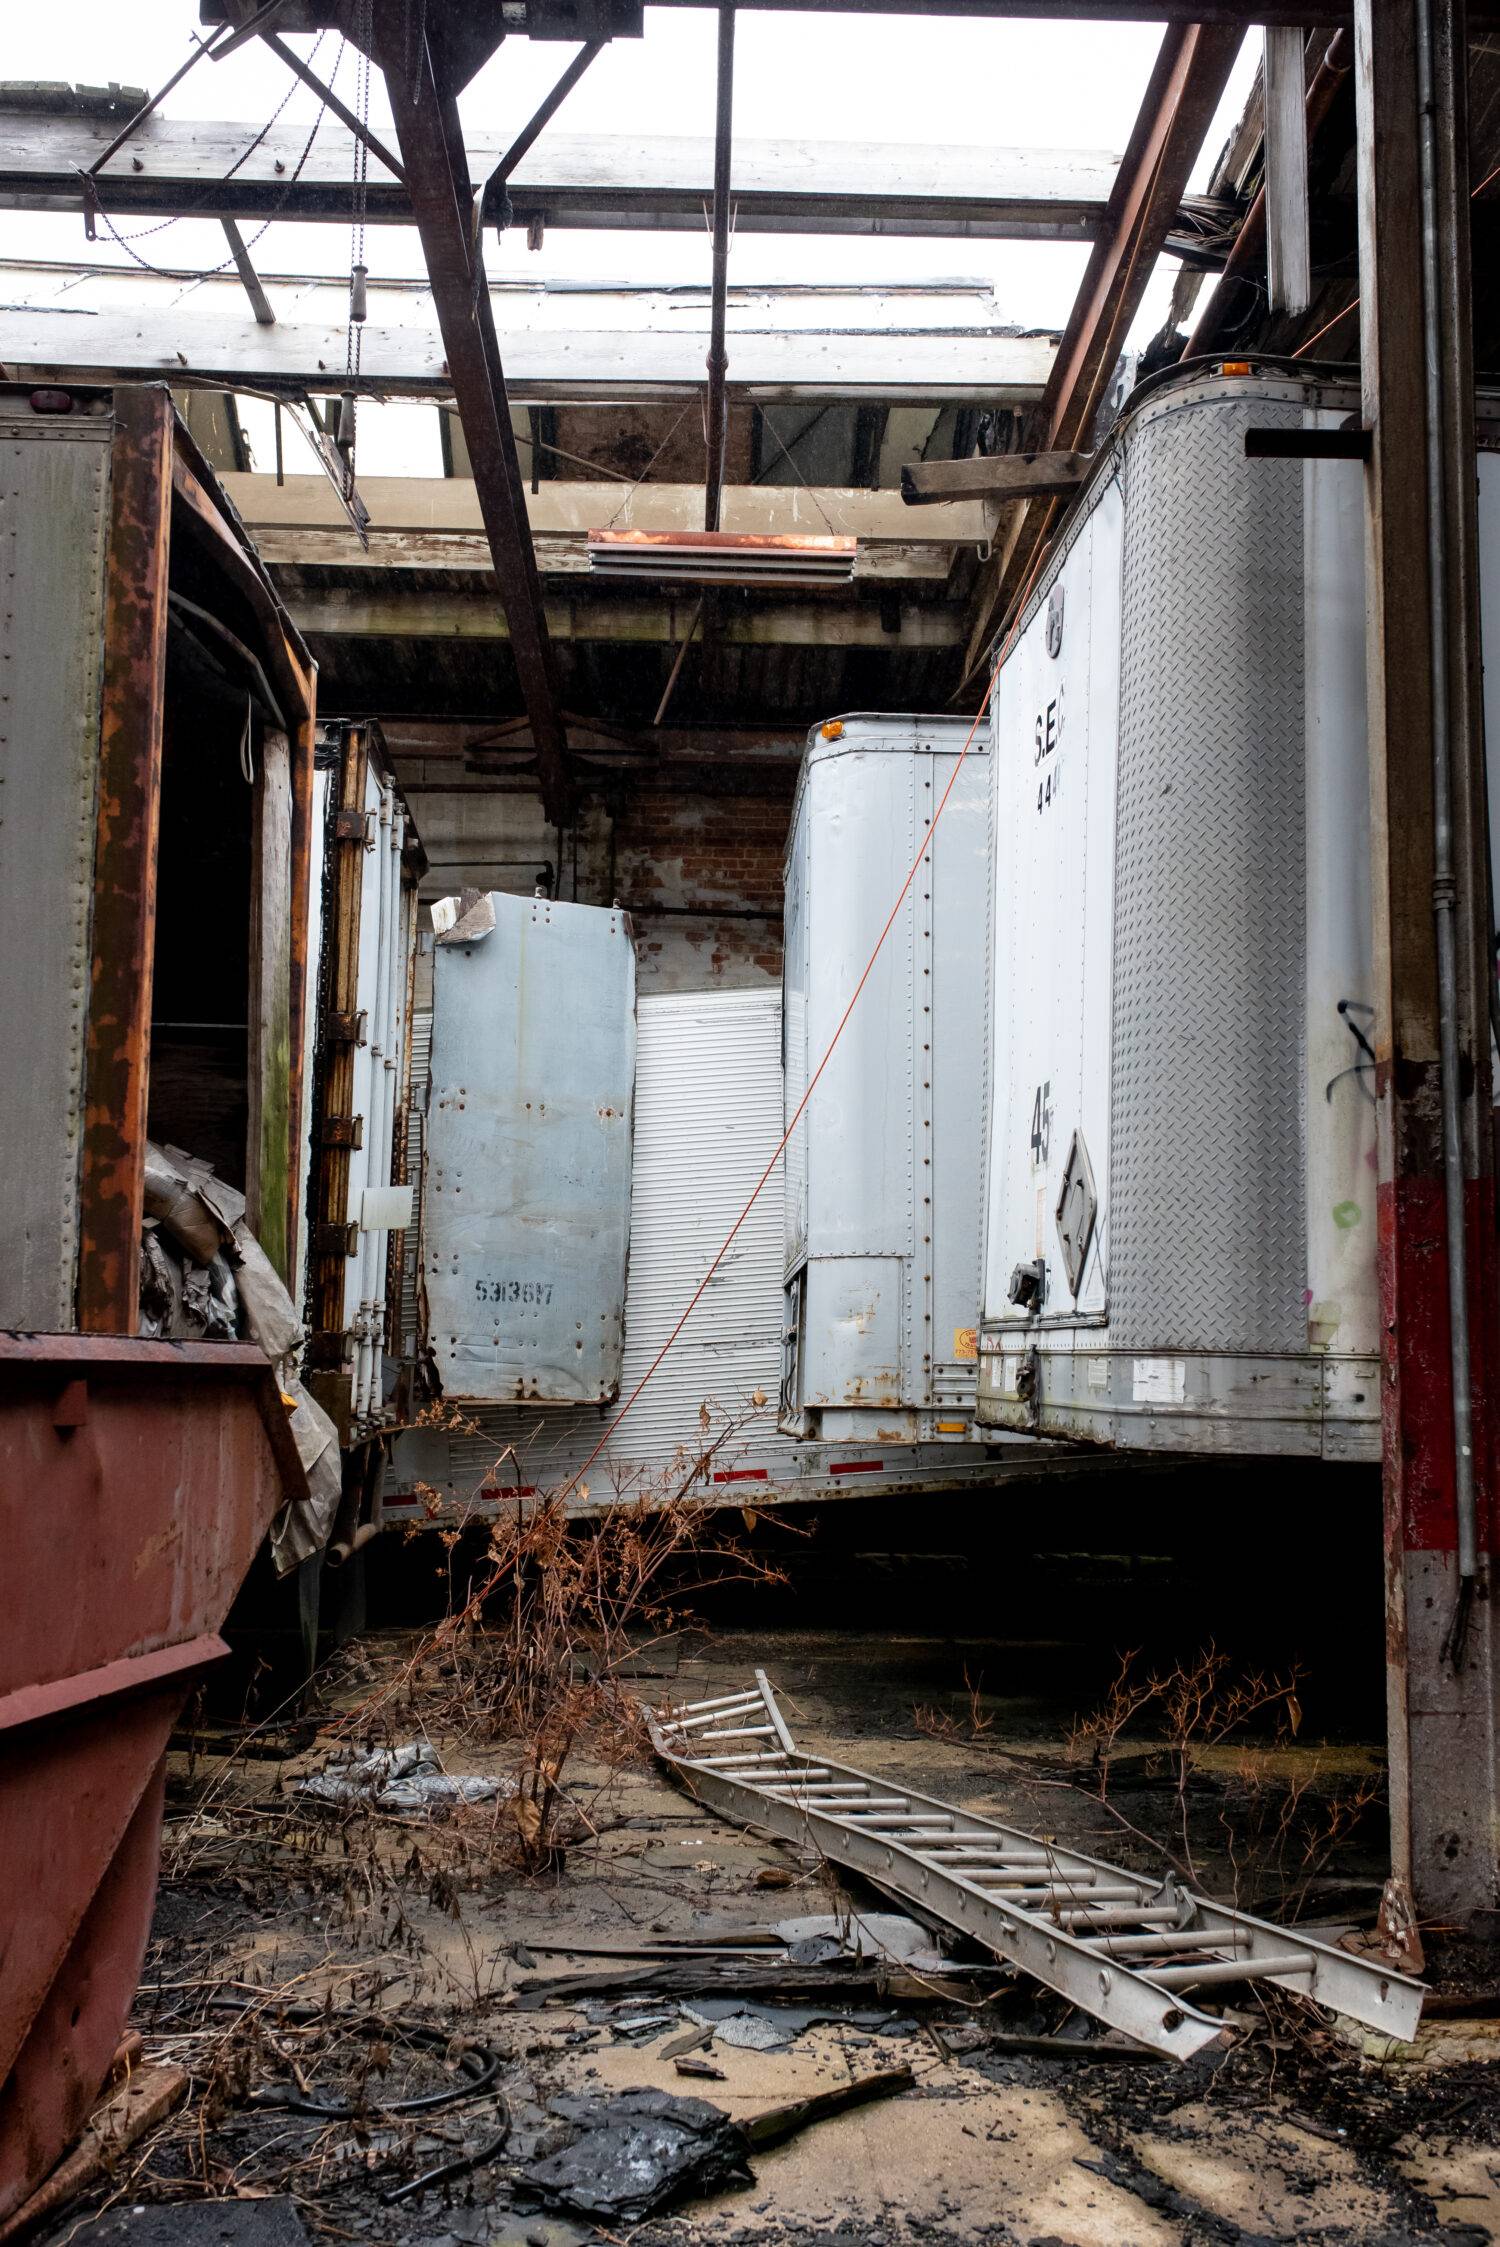 Semi-truck trailers densely packed together in the Resource Center. Some areas of the warehouse’s roof have caved in, encouraging plant life to grow among the stores of materials.